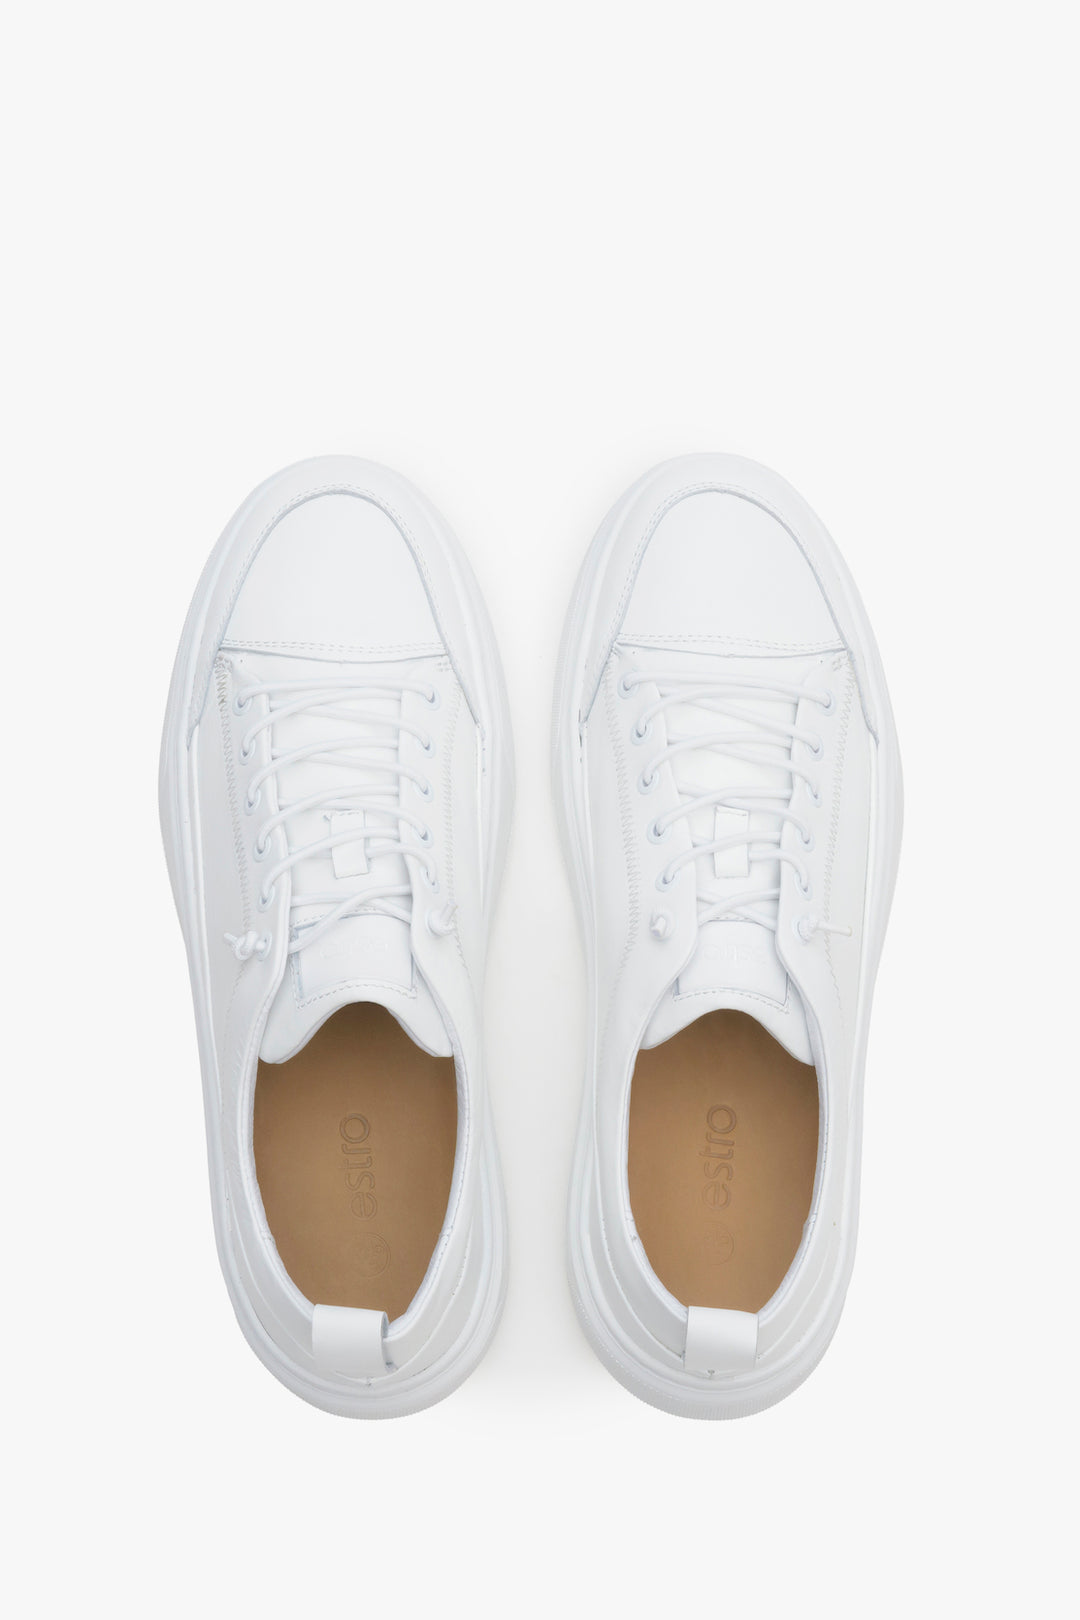 Estro men's leather sneakers in white - top view presentation of the model.